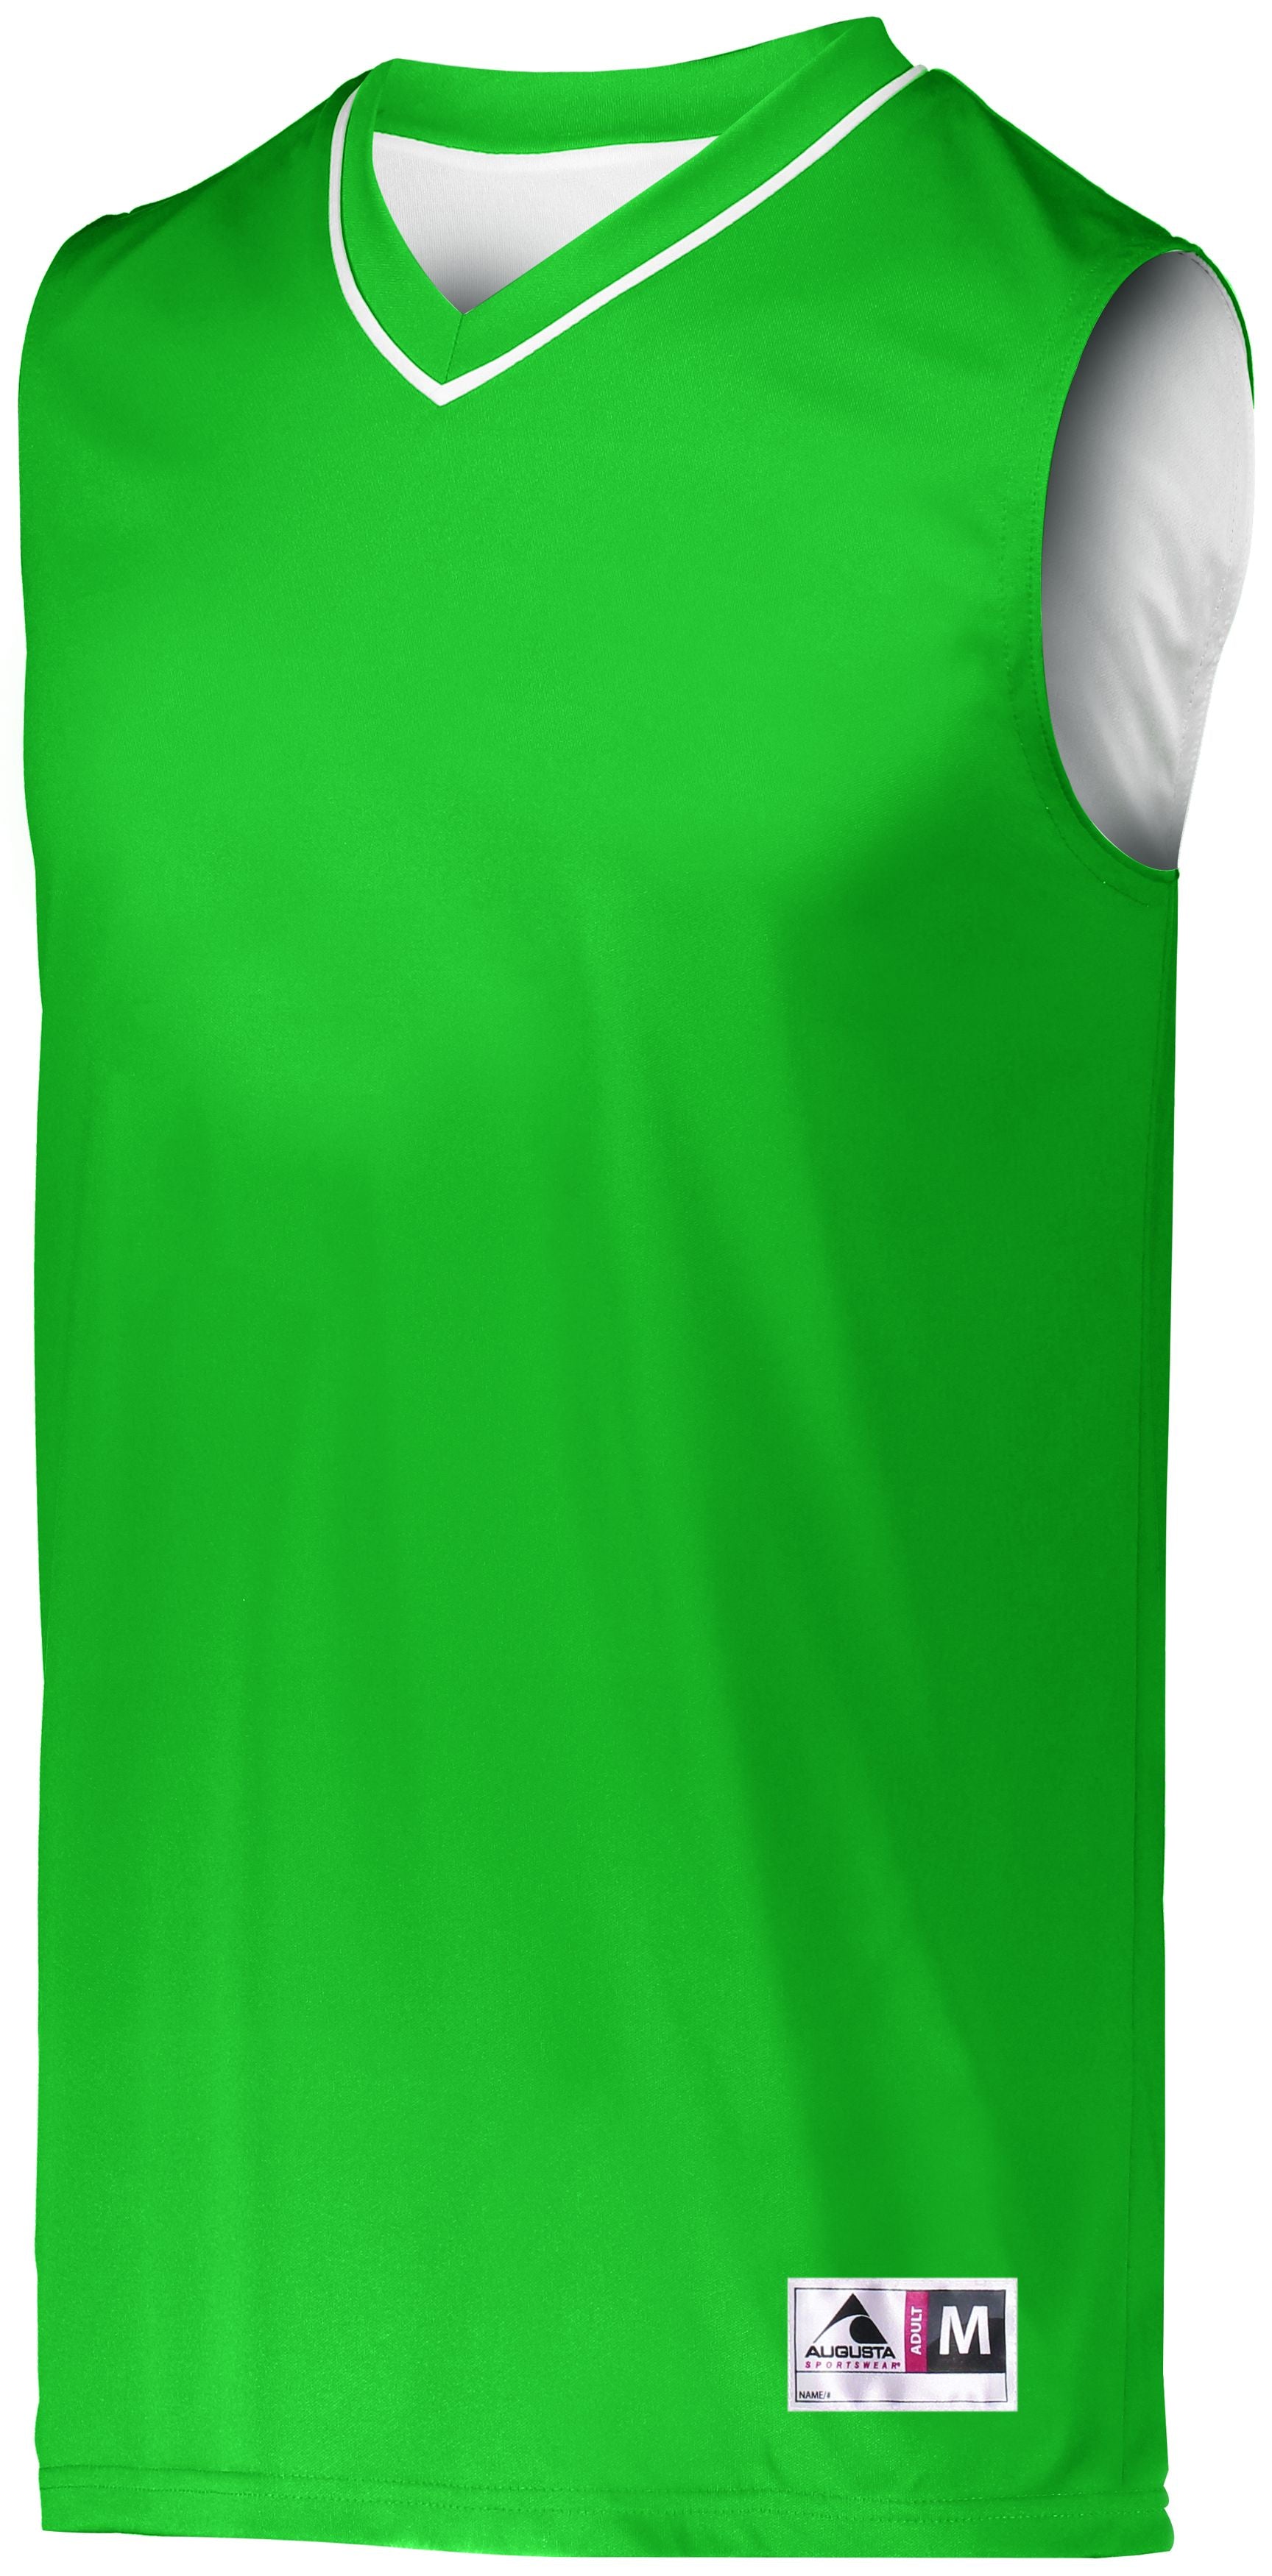 Augusta Sportswear Reversible Two-Color Jersey in Kelly/White  -Part of the Adult, Adult-Jersey, Augusta-Products, Basketball, Shirts, All-Sports, All-Sports-1 product lines at KanaleyCreations.com